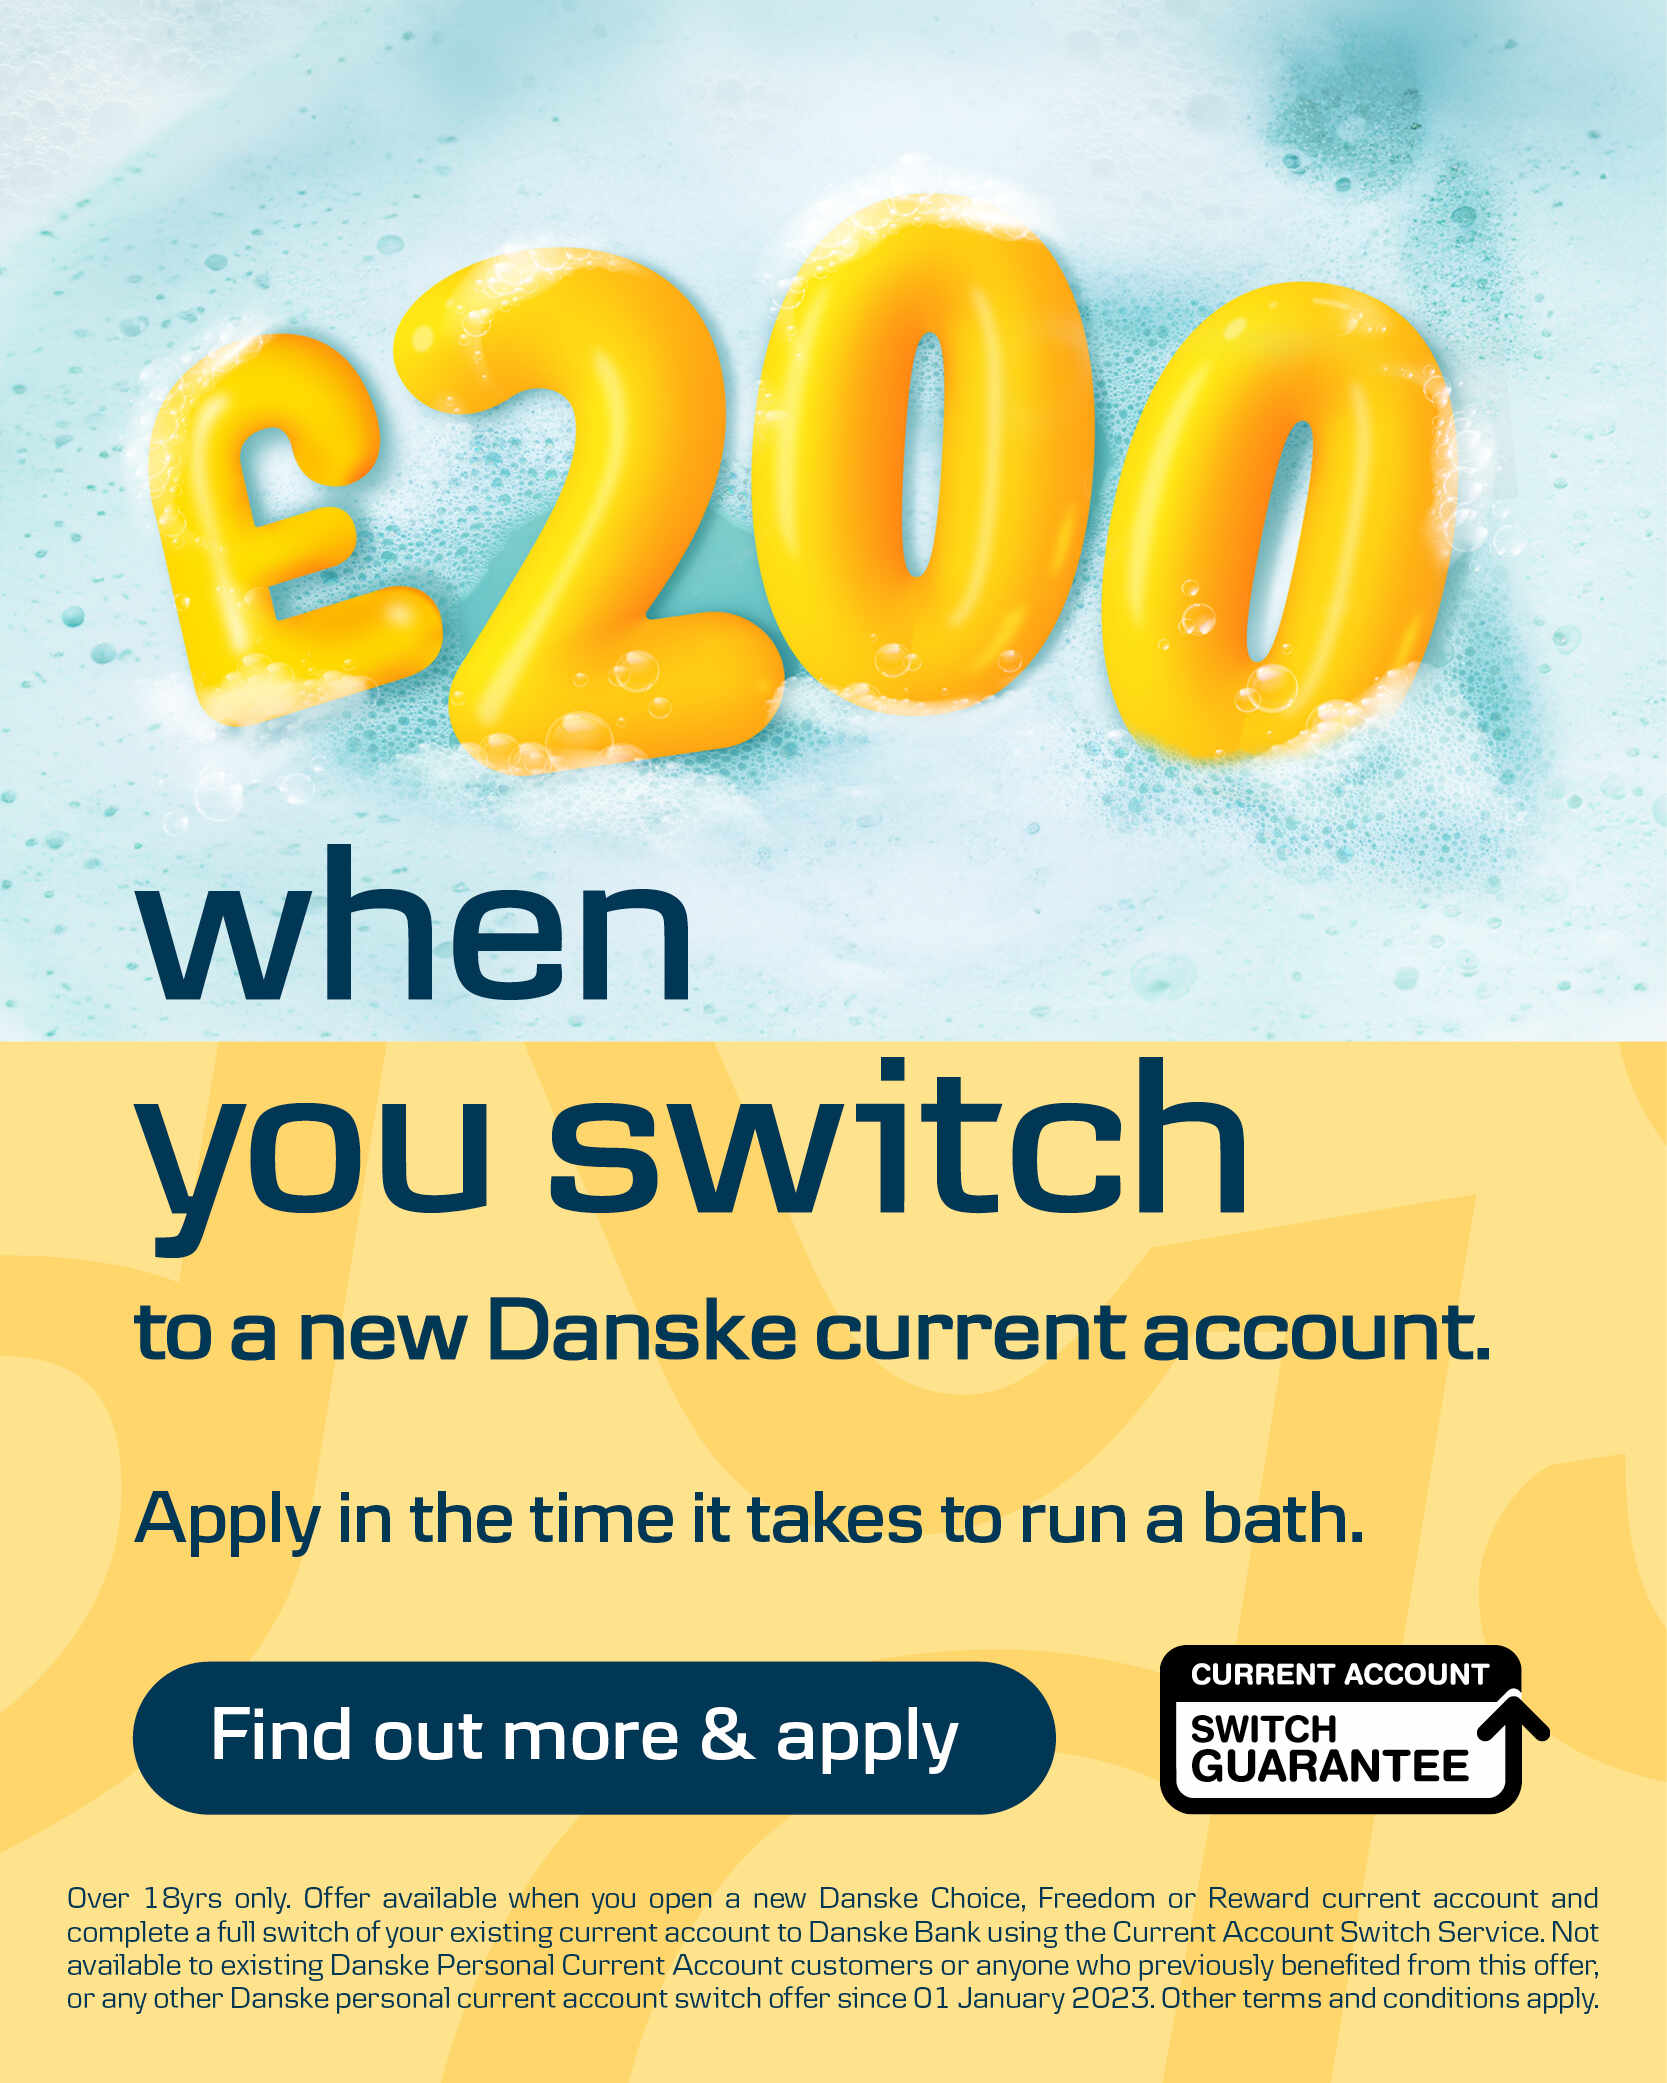 Get £200 when you switch to a new Danske current account. Over 18yrs only. Offer available when you open a new Danske Choice, Freedom or Reward current account and complete a full switch of your existing current account to Danske Bank using the Current Account Switch Service. Not available to existing Danske Personal Current Account customers or anyone who previously benefited from this offer, or any other Danske personal current account switch offer since 01 January 2023. Other terms and conditions apply.